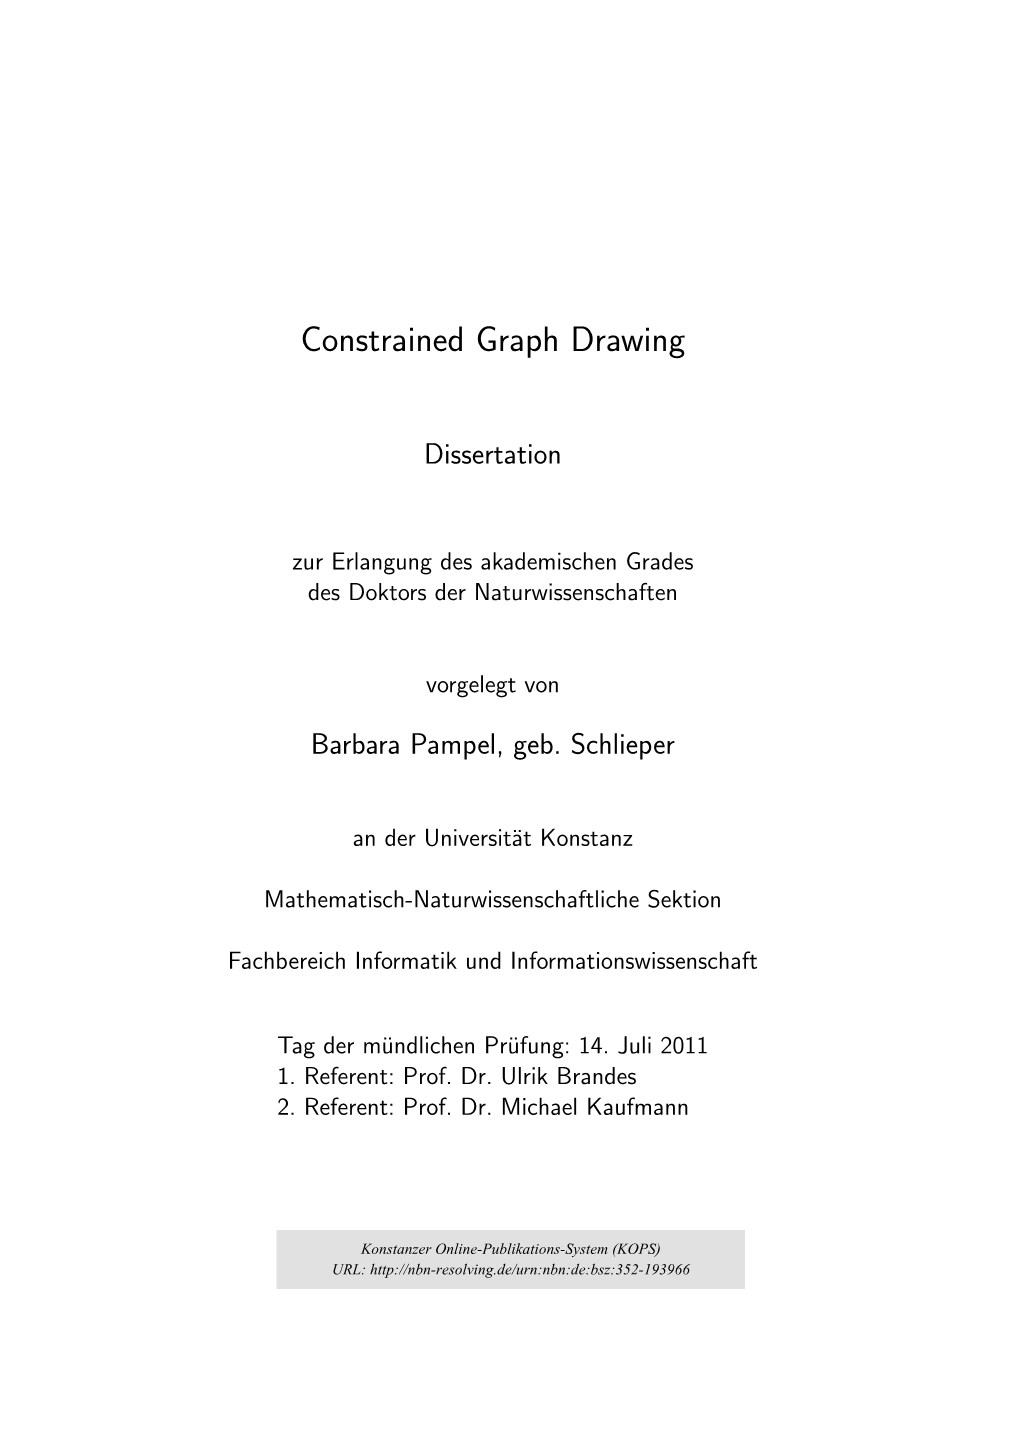 Constraint Graph Drawing